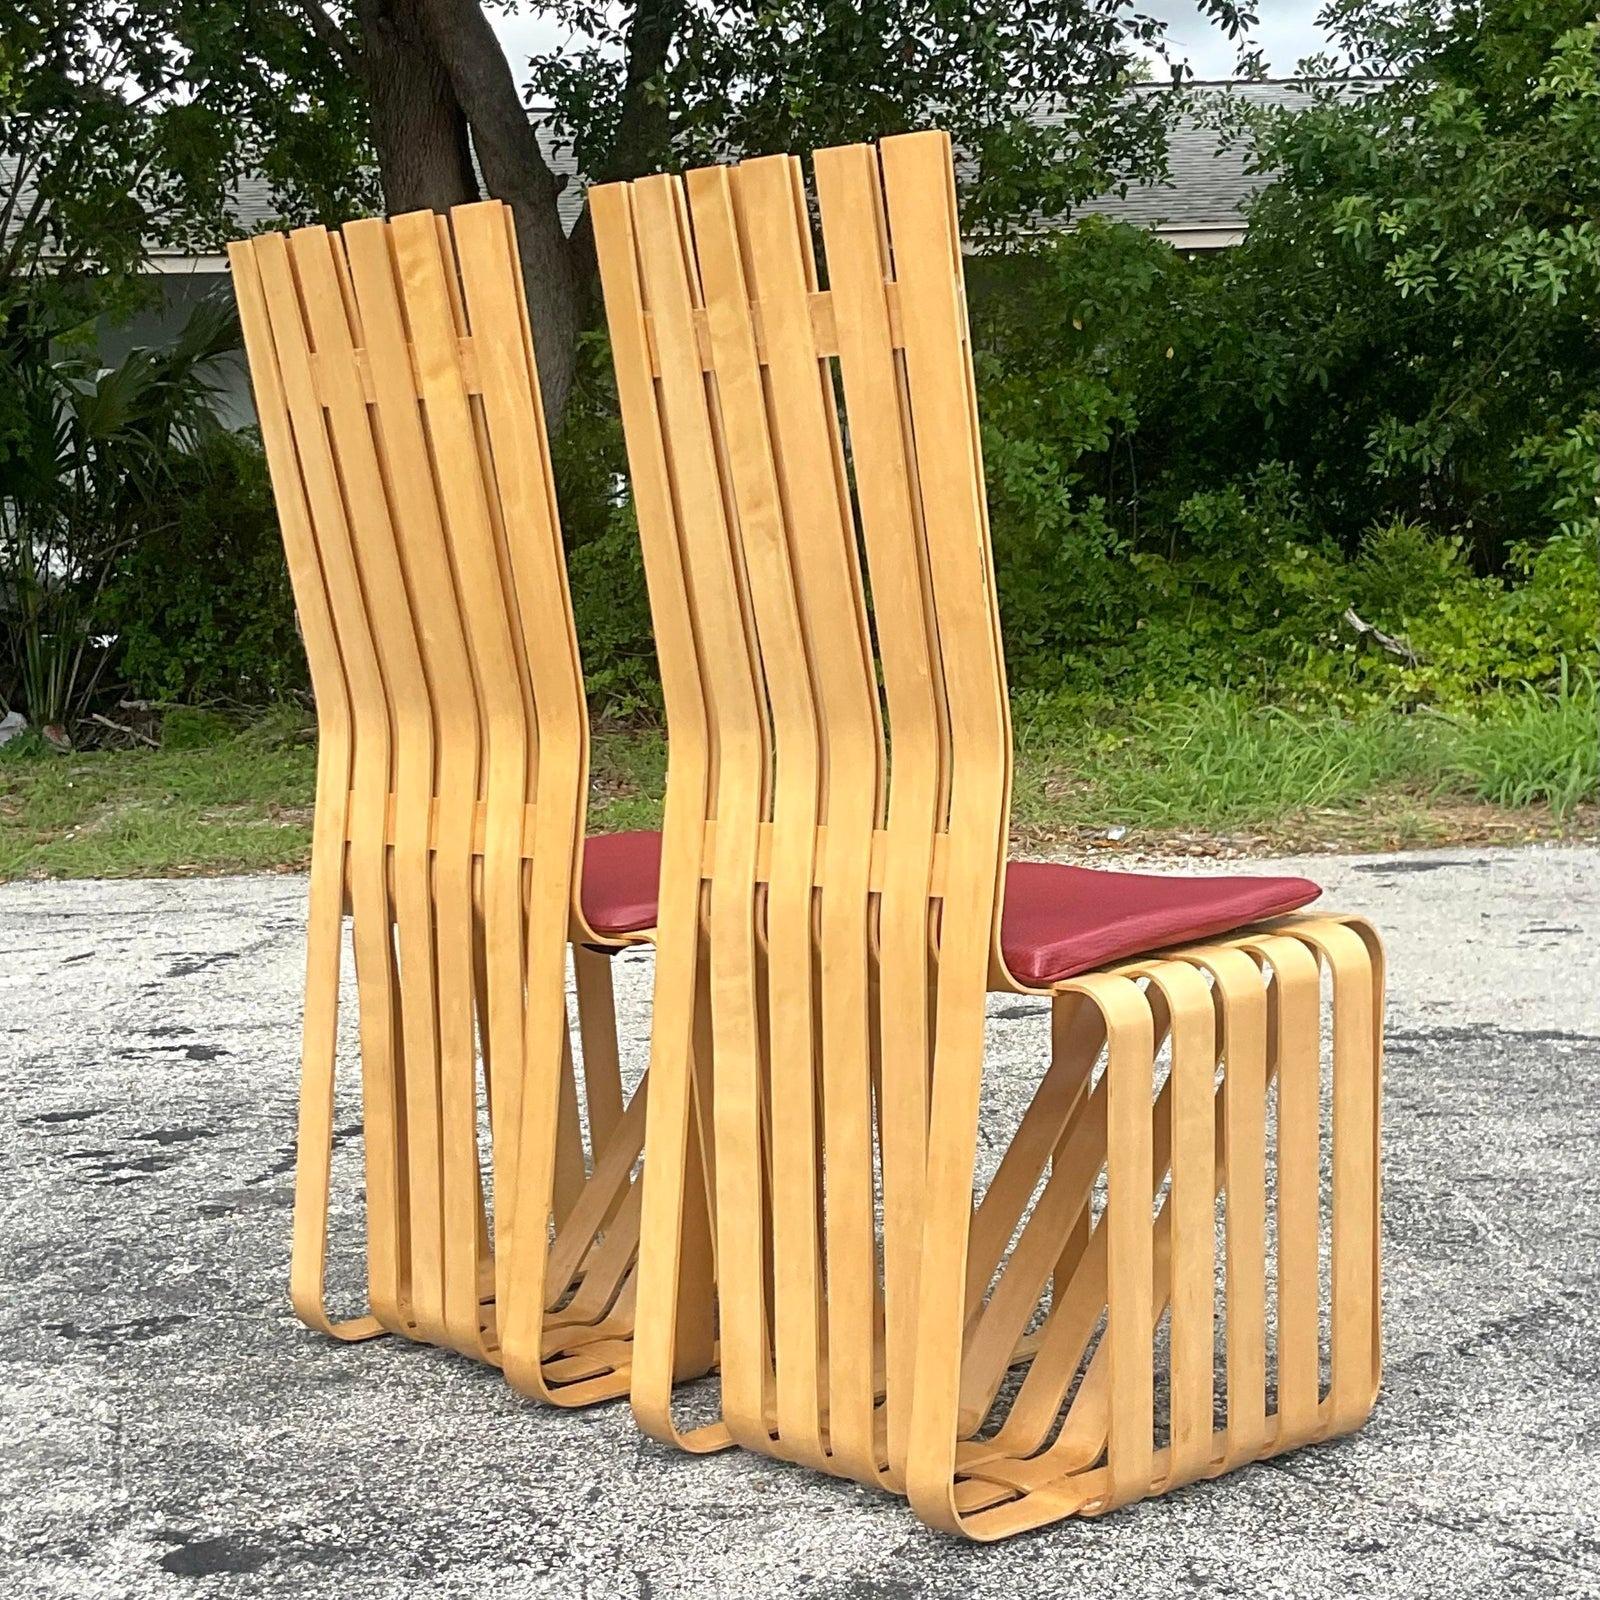 20th Century Vintage Contemporary Signed Frank Gehry for Knoll “High Sticking” Chair - a Pair For Sale